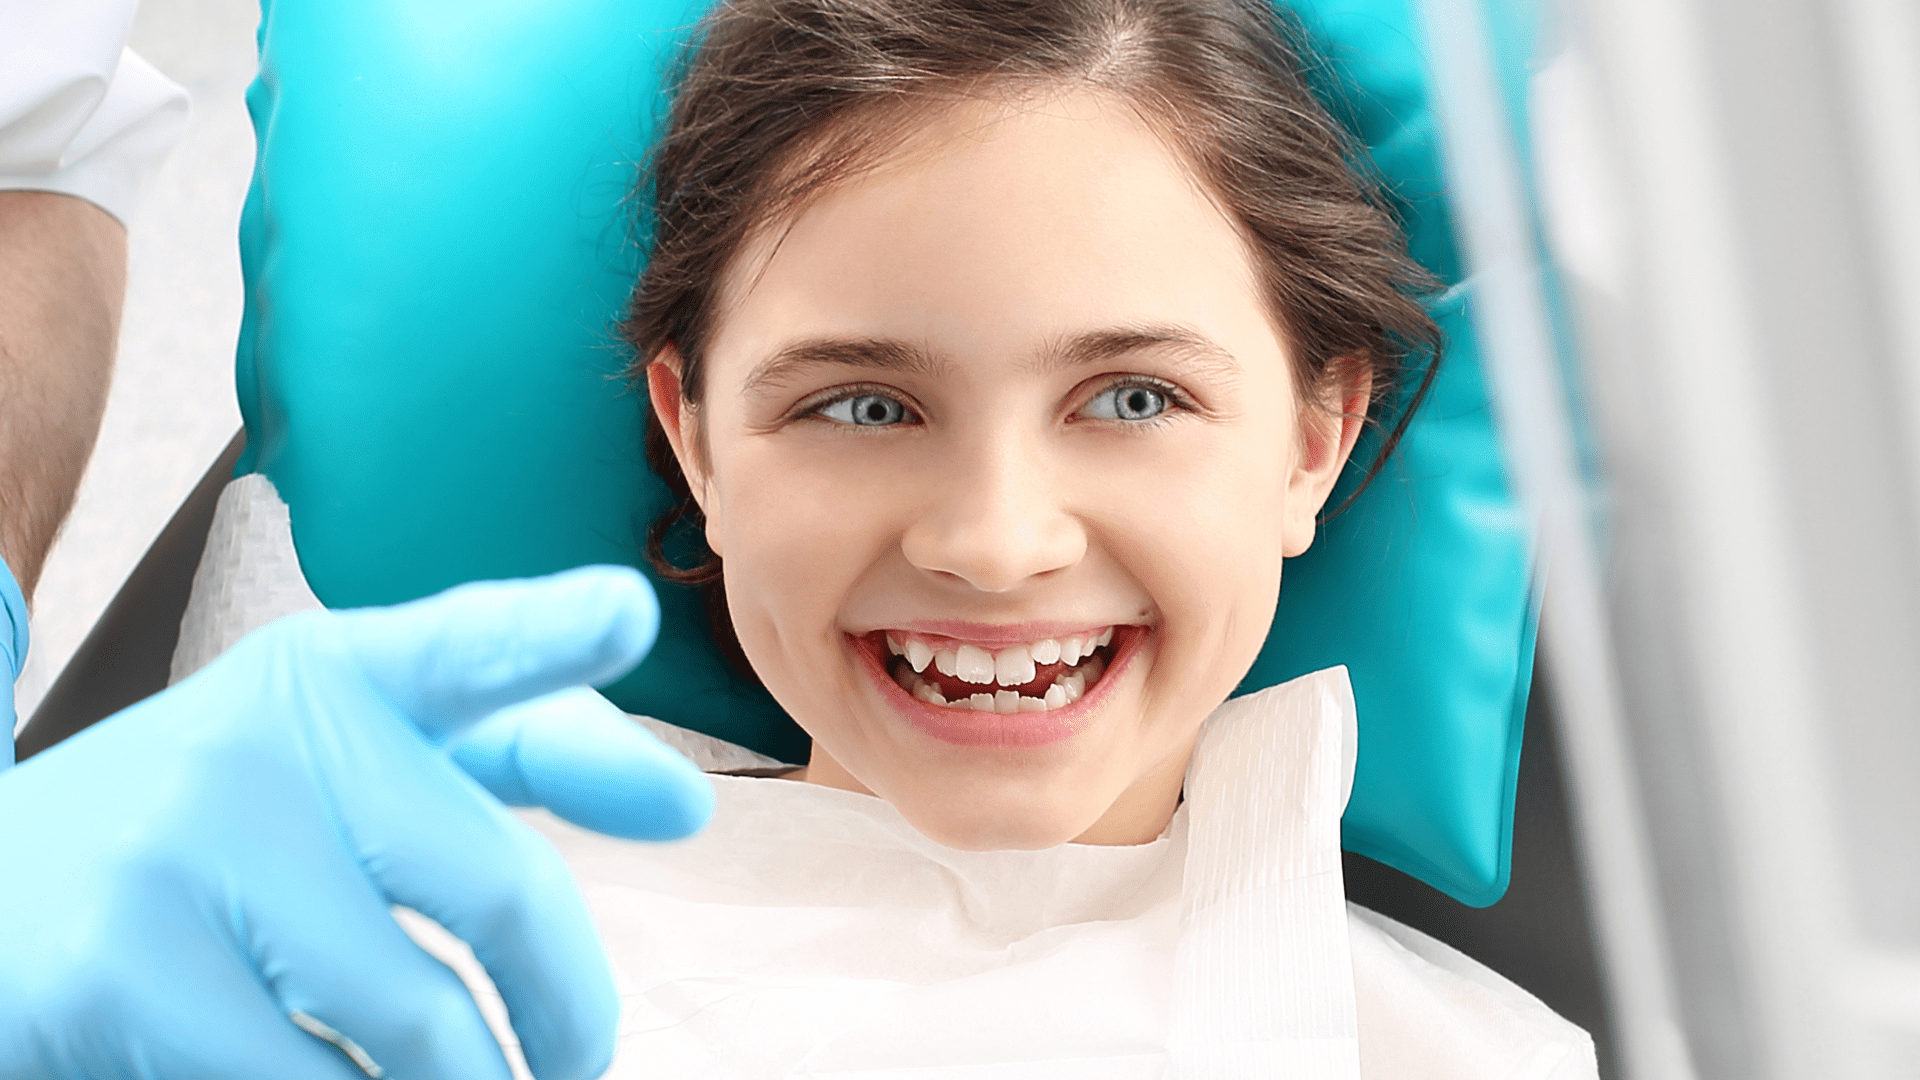 Investing In Healthy Smiles With Sealants